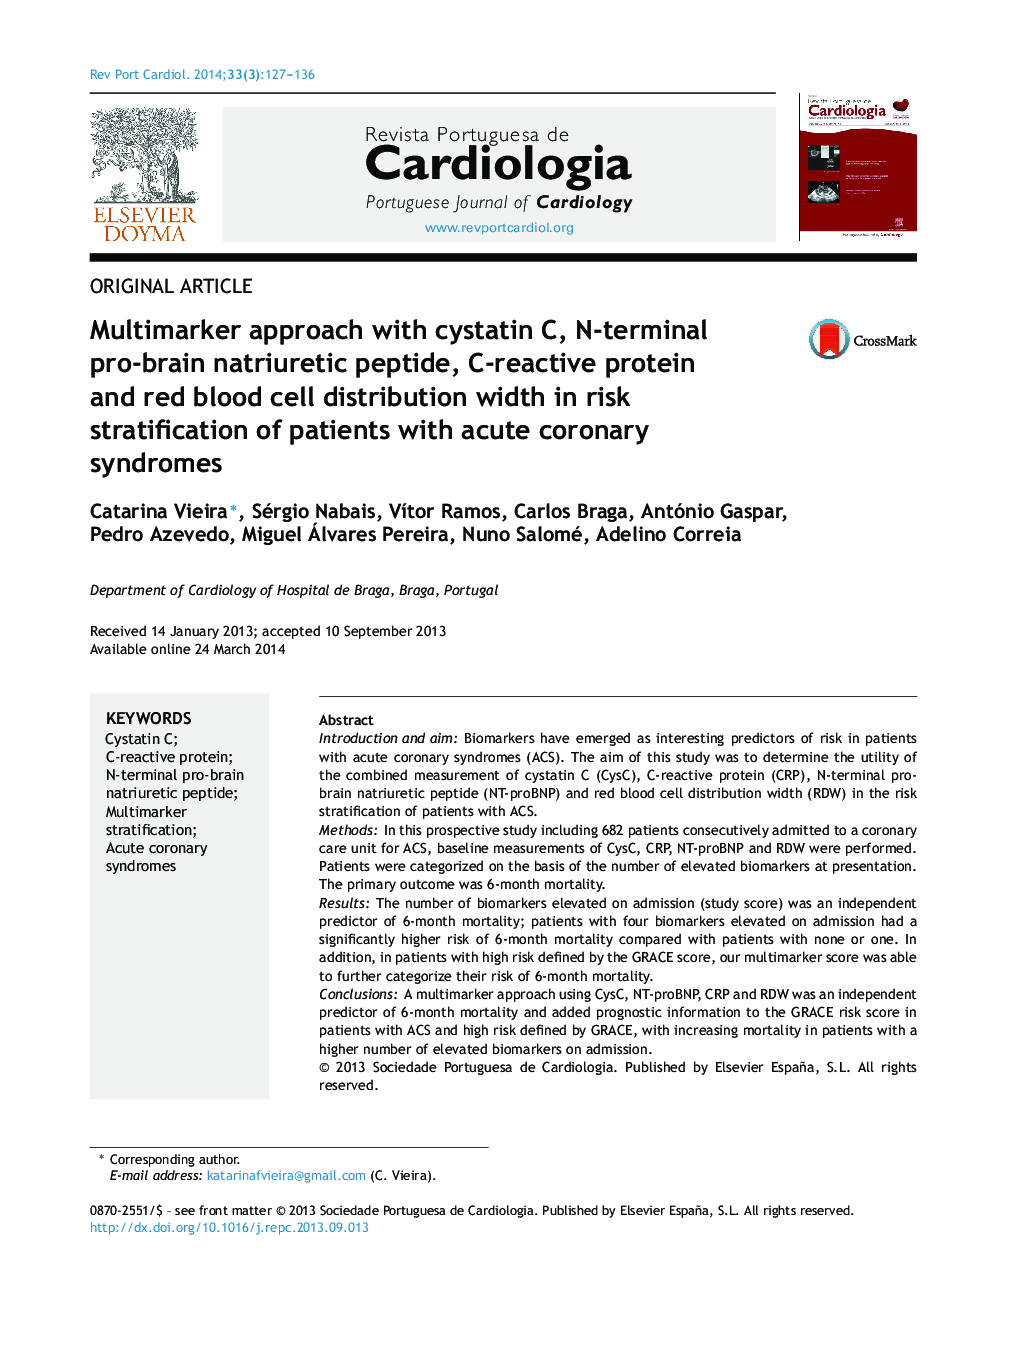 Multimarker approach with cystatin C, N-terminal pro-brain natriuretic peptide, C-reactive protein and red blood cell distribution width in risk stratification of patients with acute coronary syndromes